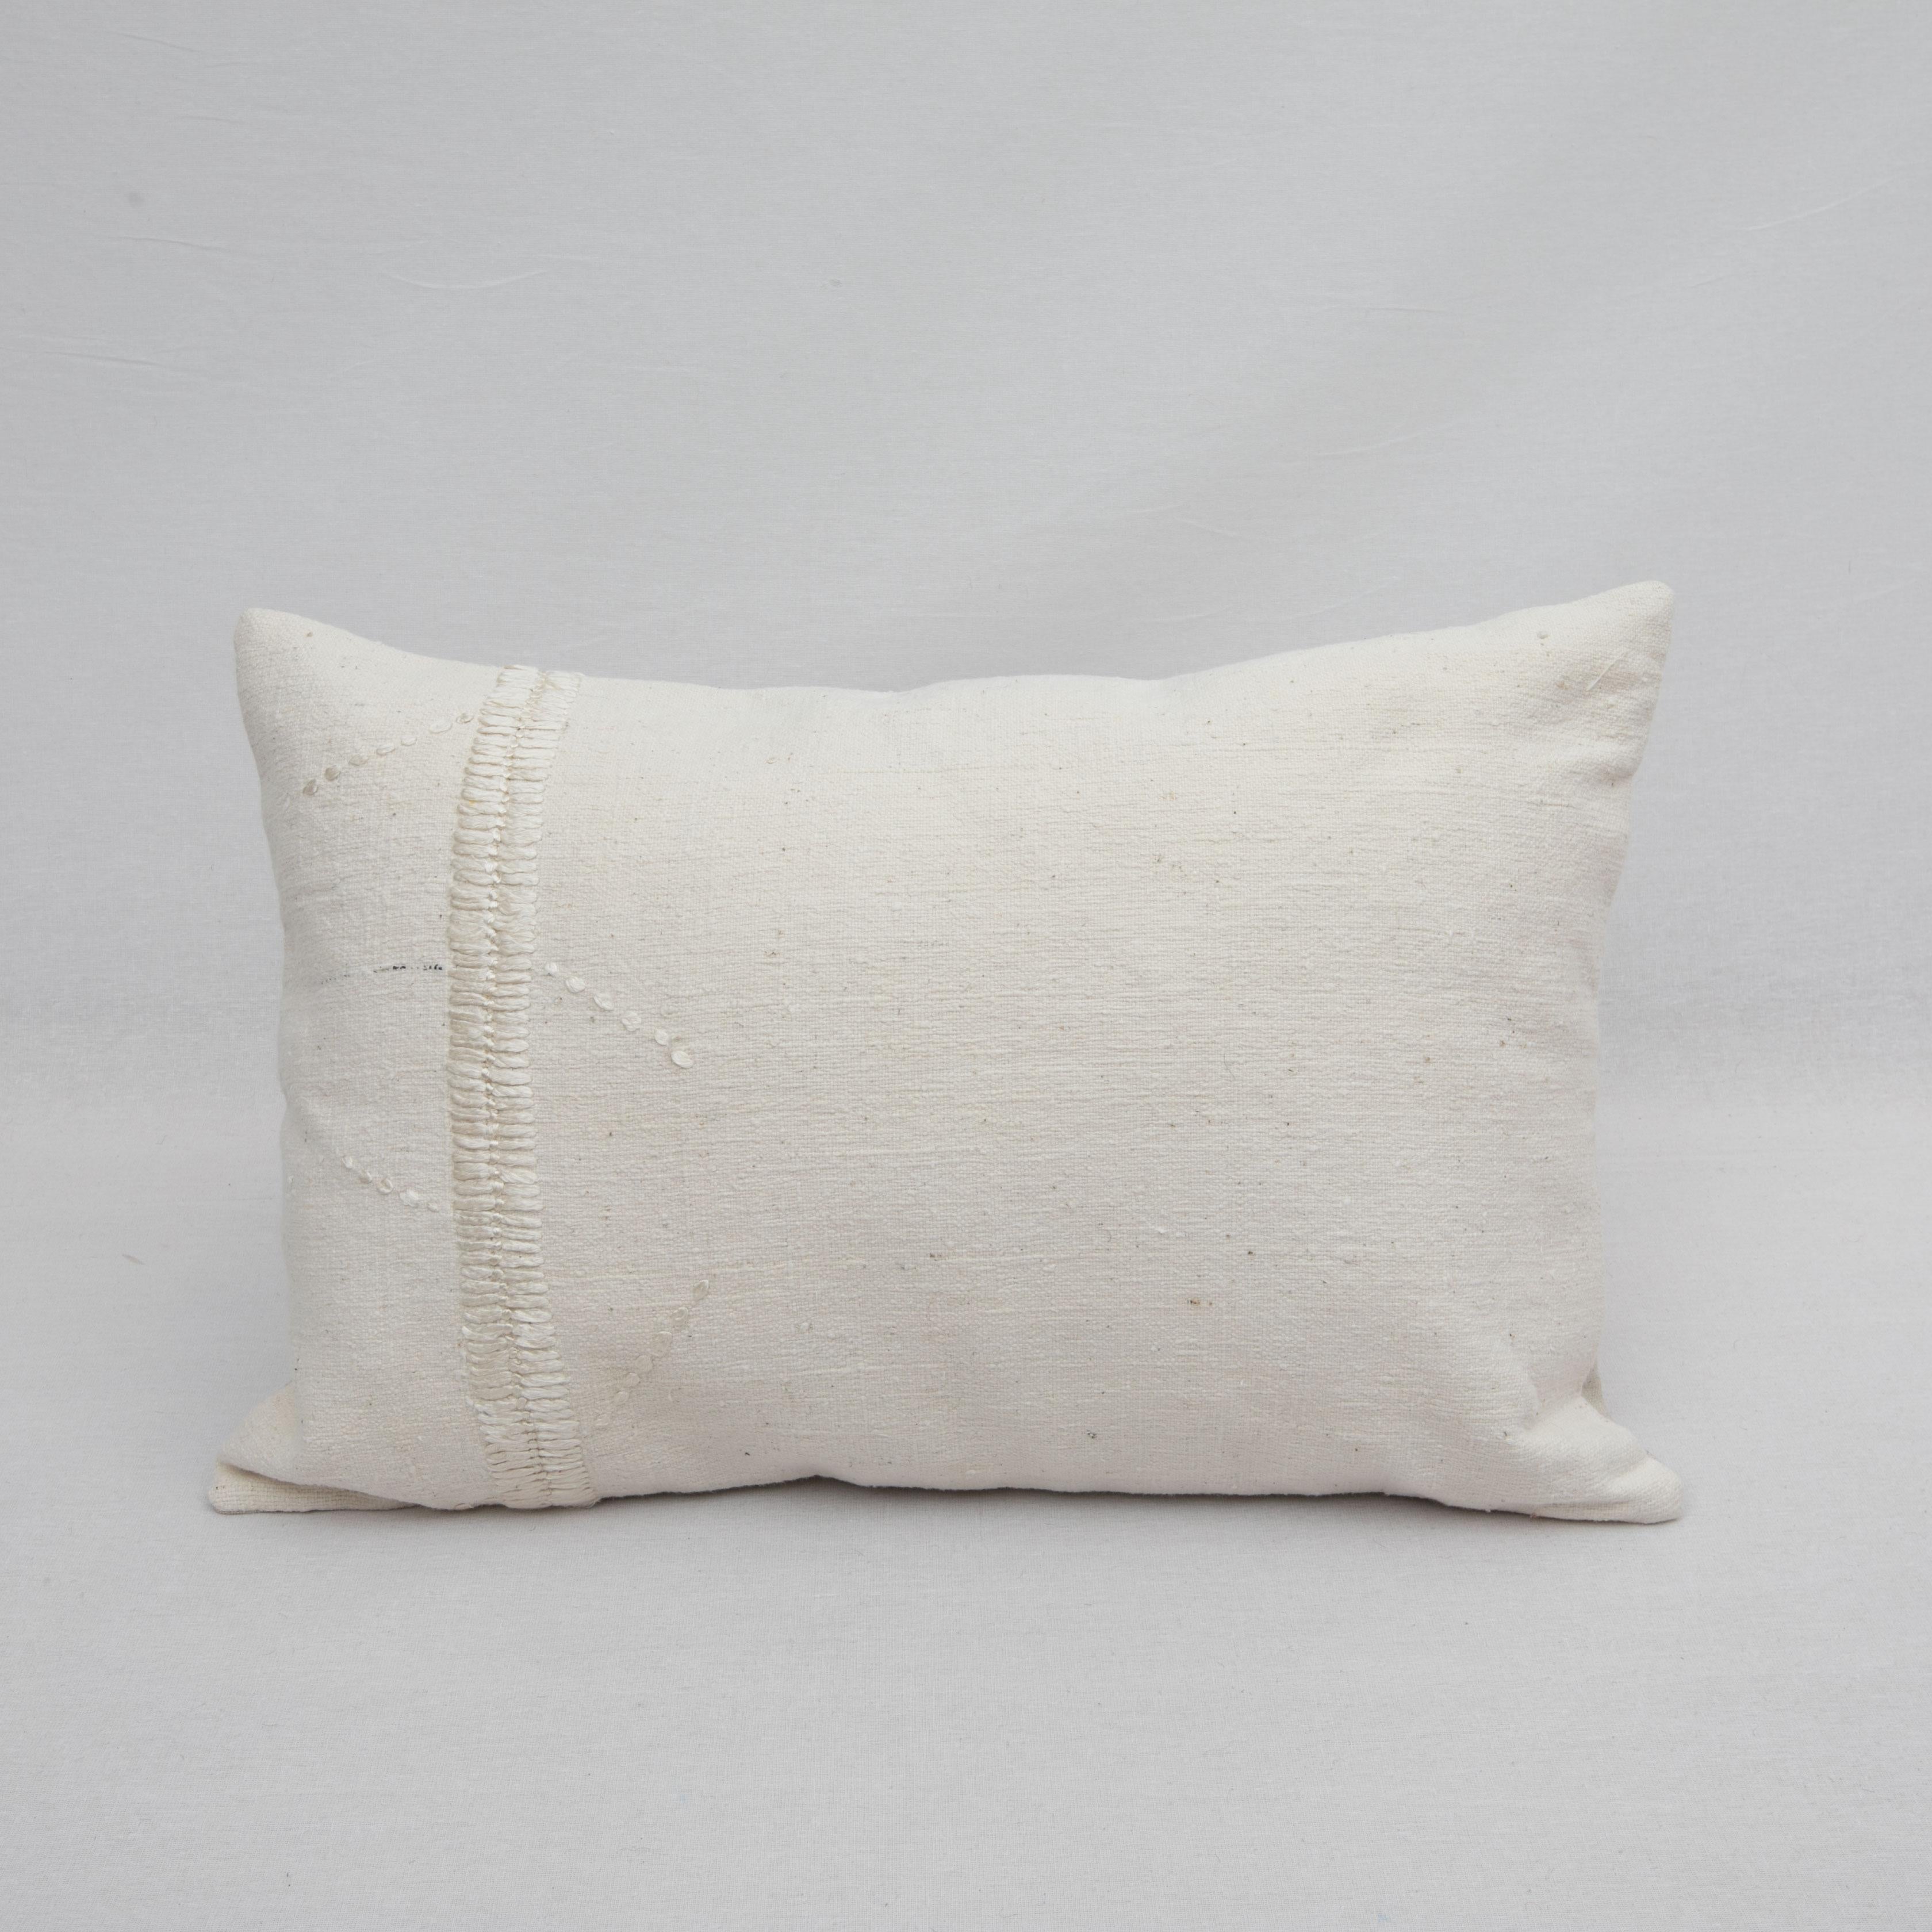 This Pillow Case id made from a vintage cotton and wool coverlet made during mid 20th c. in Western Anatolia, Turkey. The silk stitching on it is hand done by us.

It does not come with an insert.
Linen in the back.
Zipper Closure.
Dry Cleaning